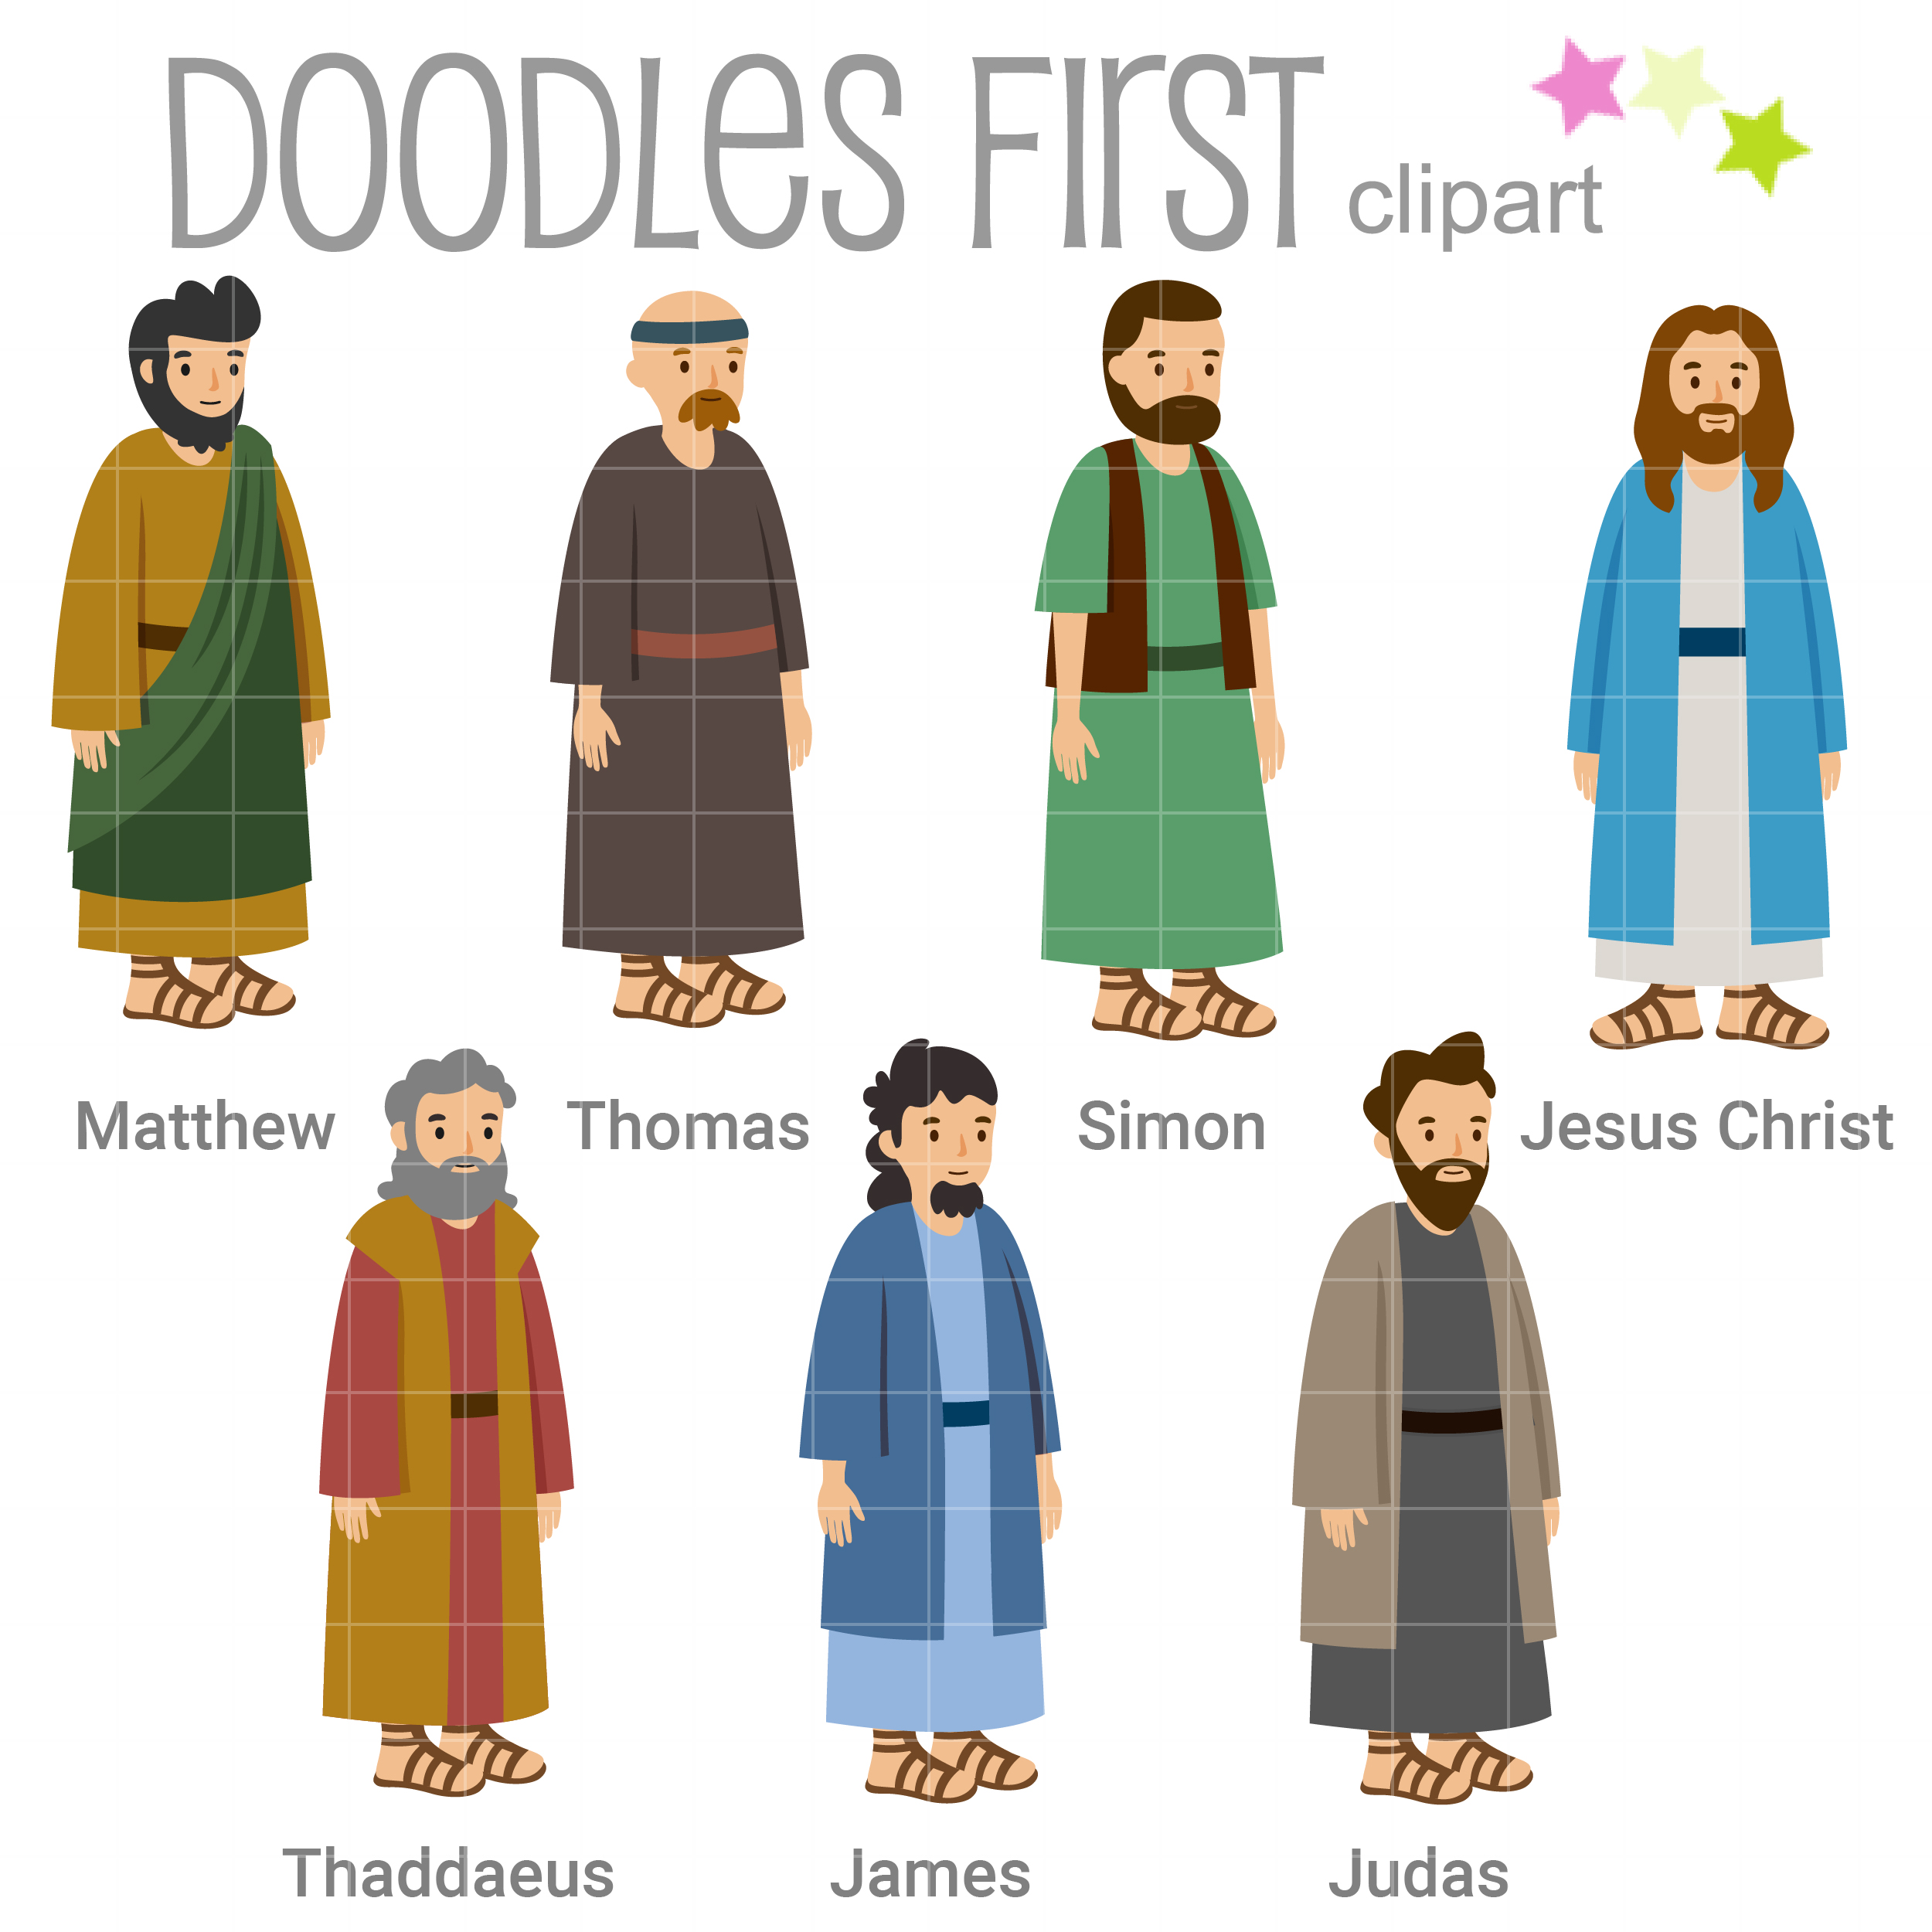 jesus-christ-and-6-of-the-12-disciples-clip-art-set-daily-art-hub-free-clip-art-everyday